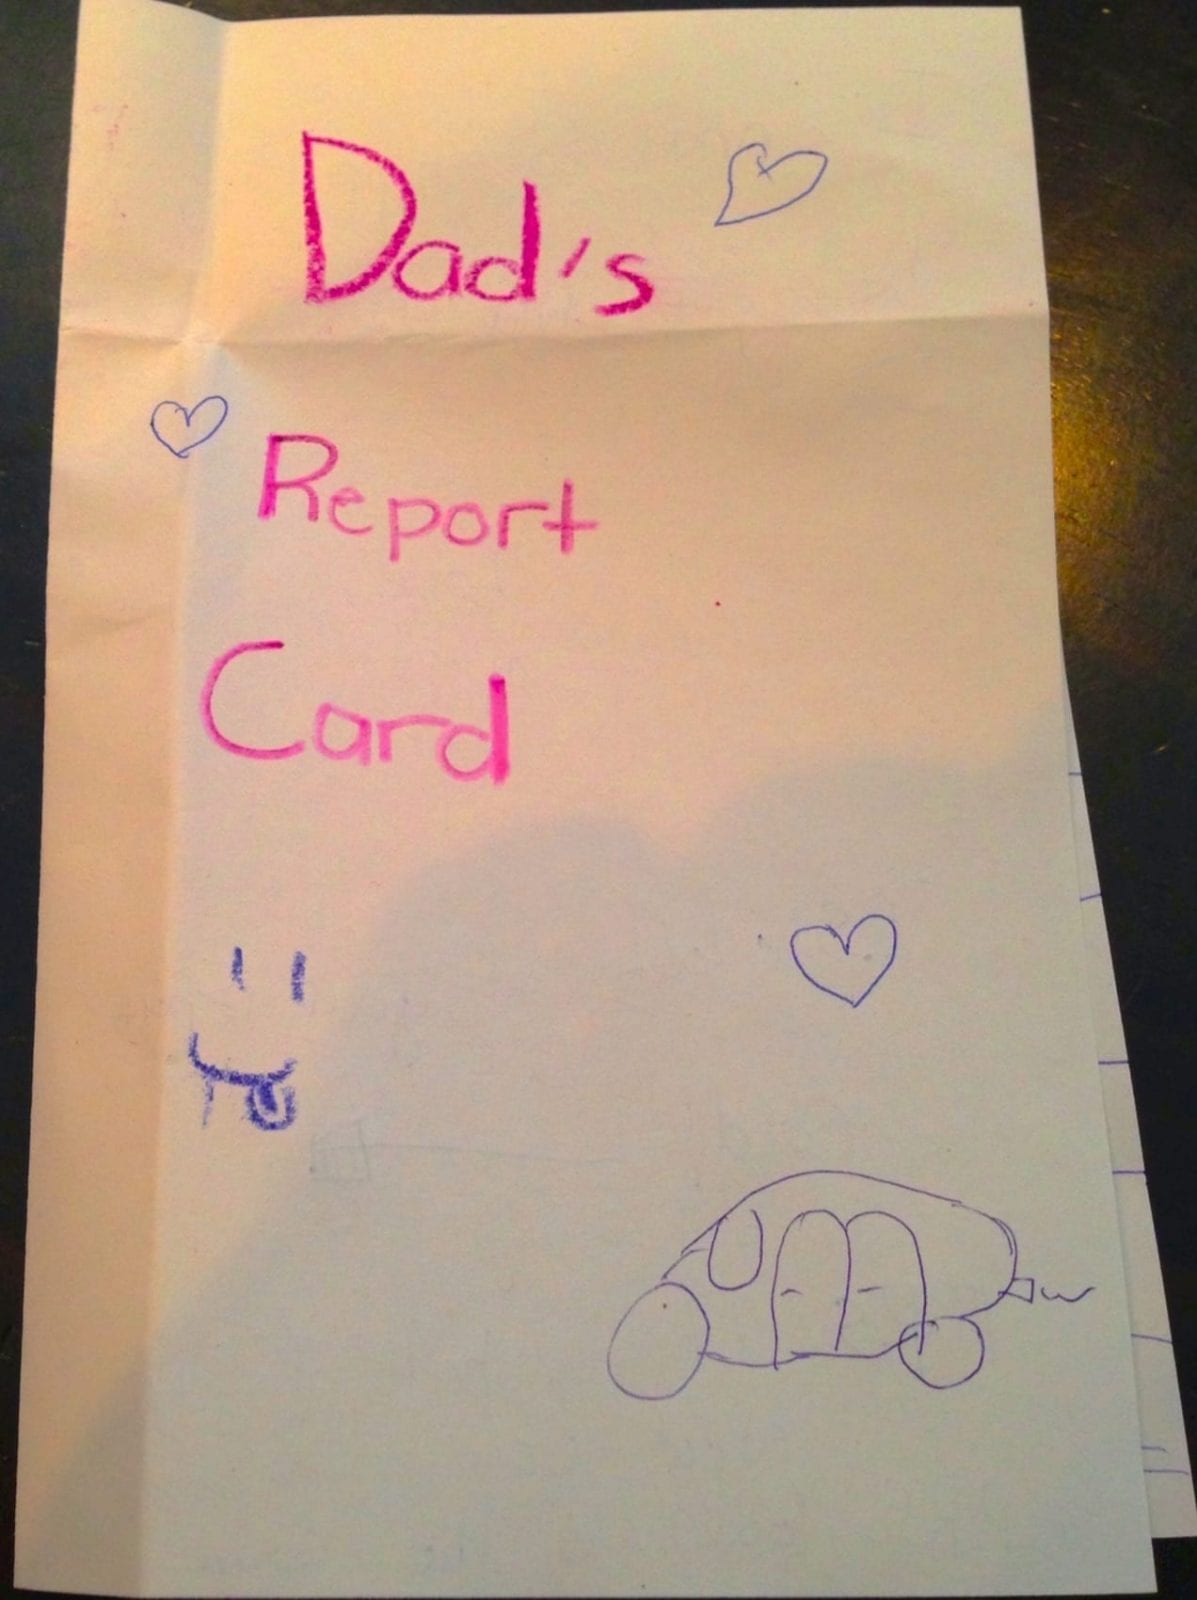 Report Card Cover